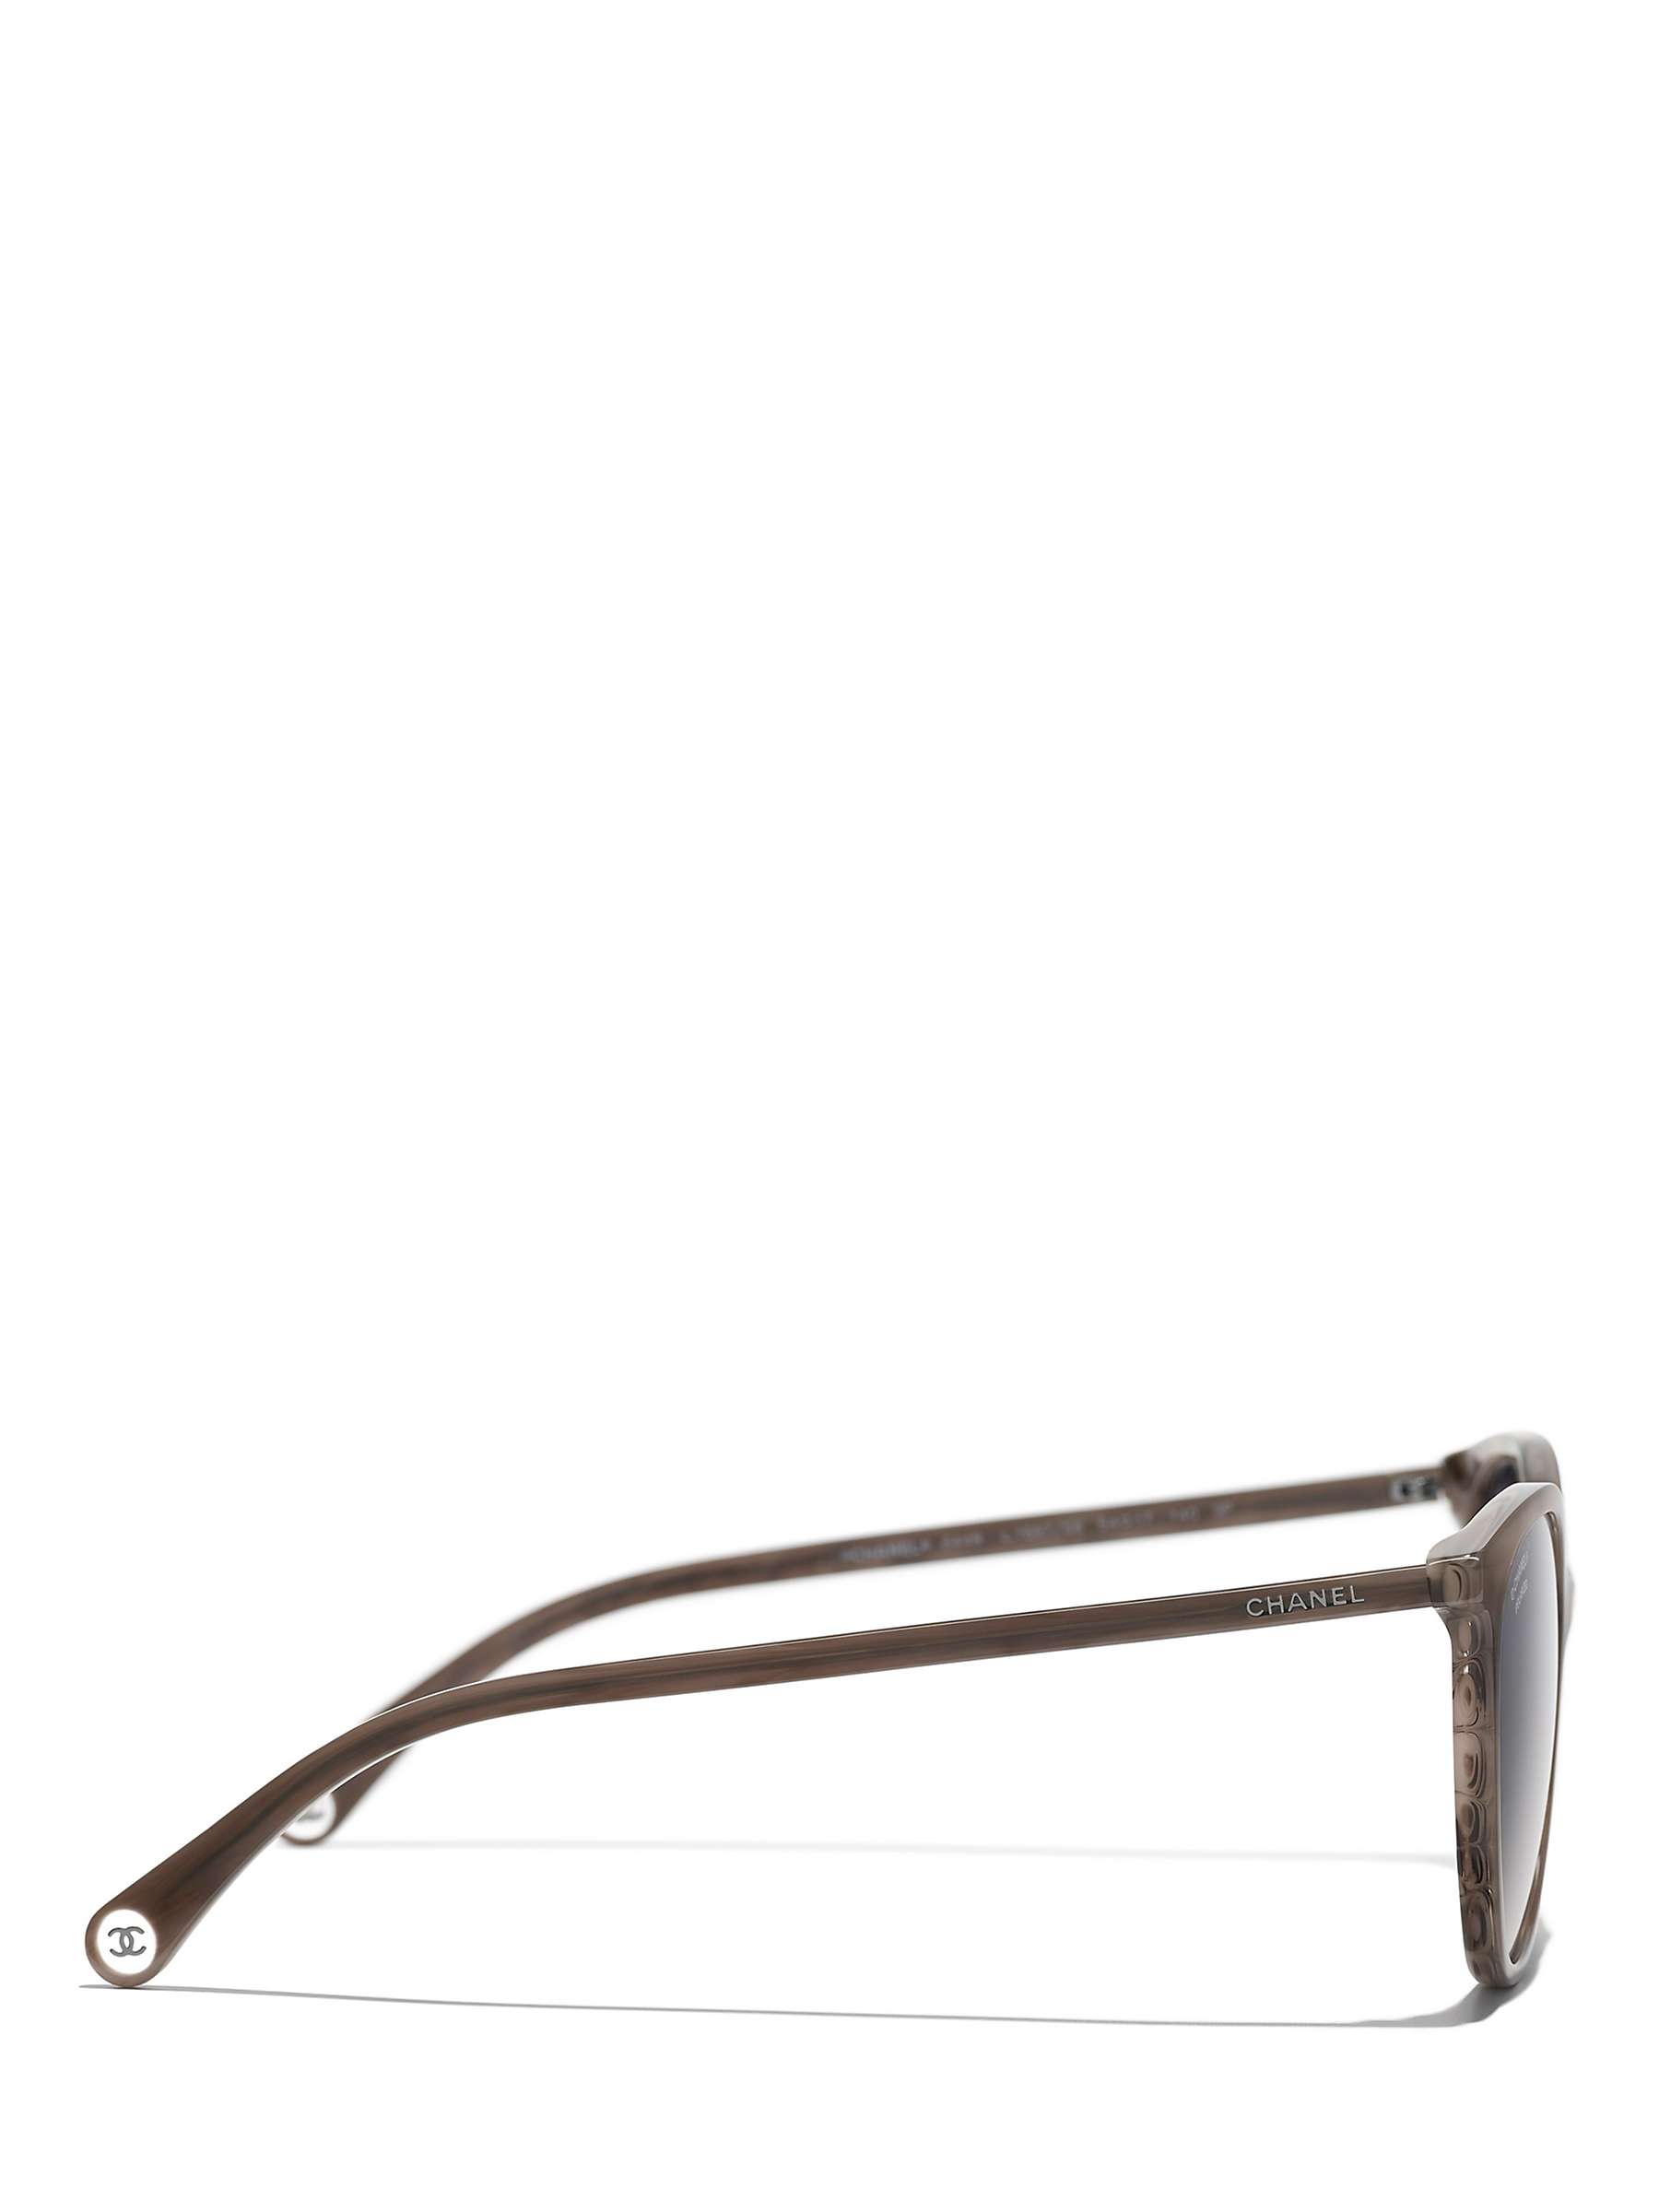 Buy CHANEL Oval Sunglasses CH5448 Grey Horn/Grey Gradient Online at johnlewis.com